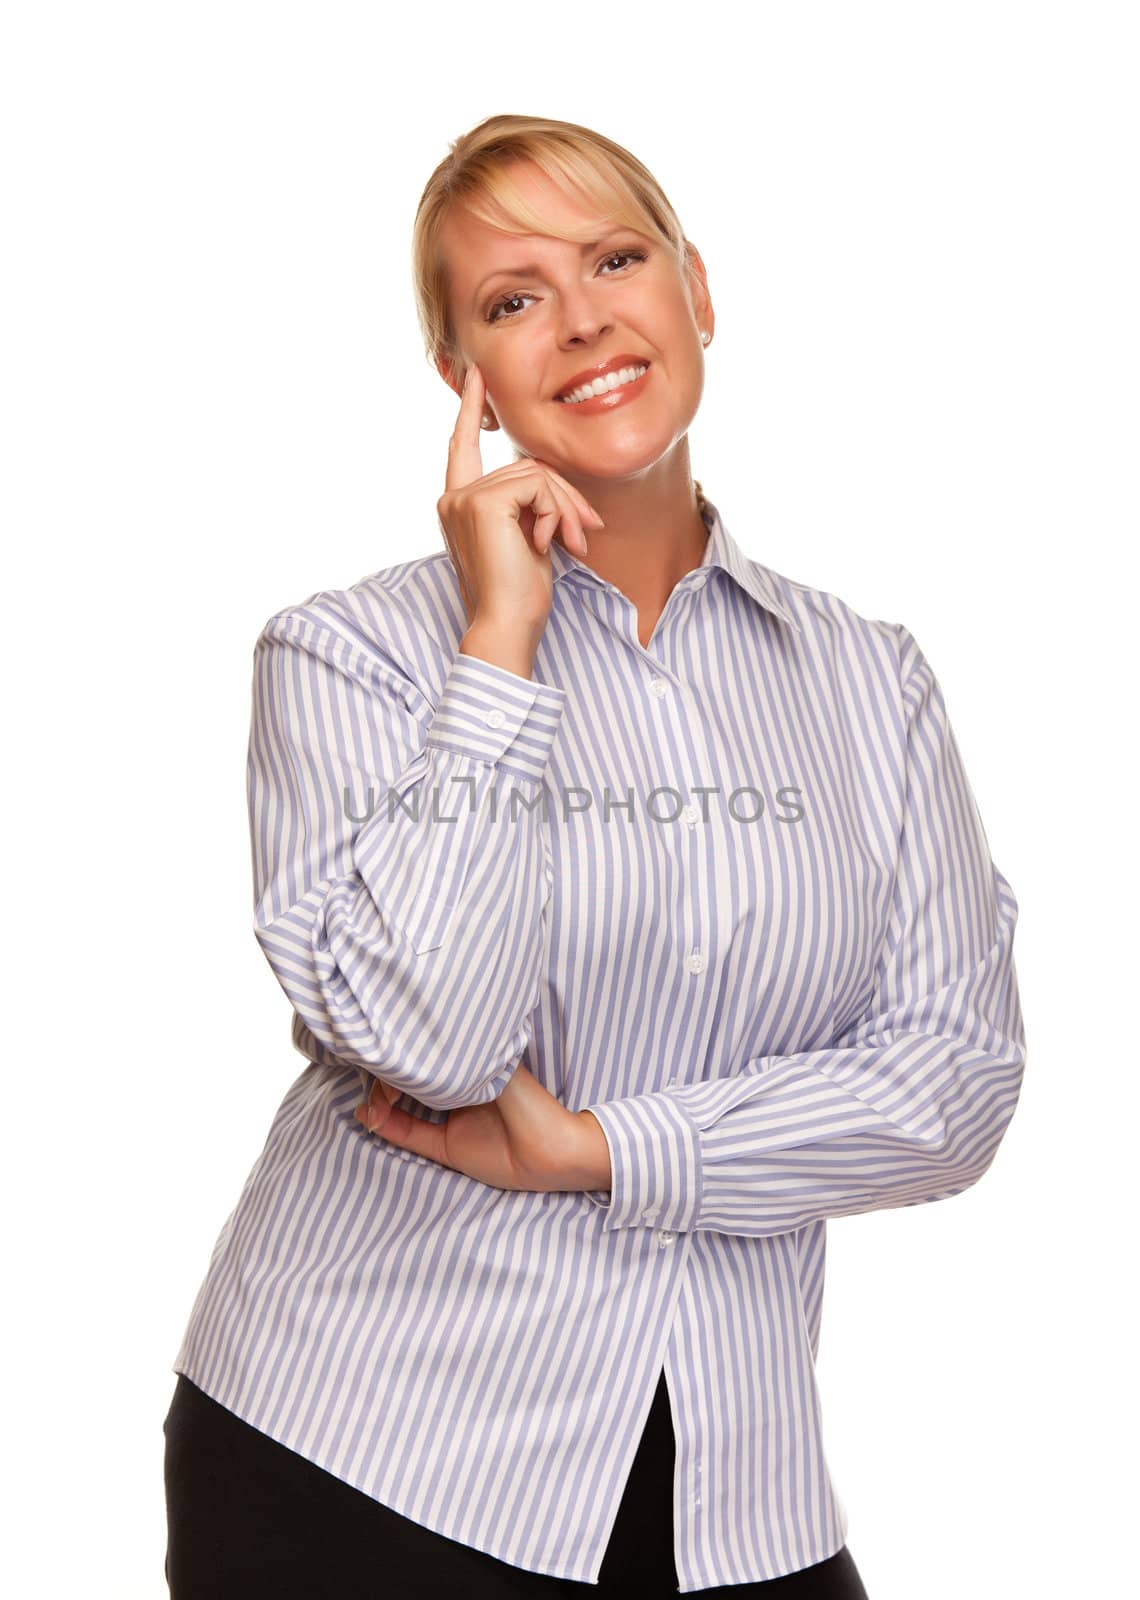 Attractive Smiling Blond Woman Isolated on a White Background.